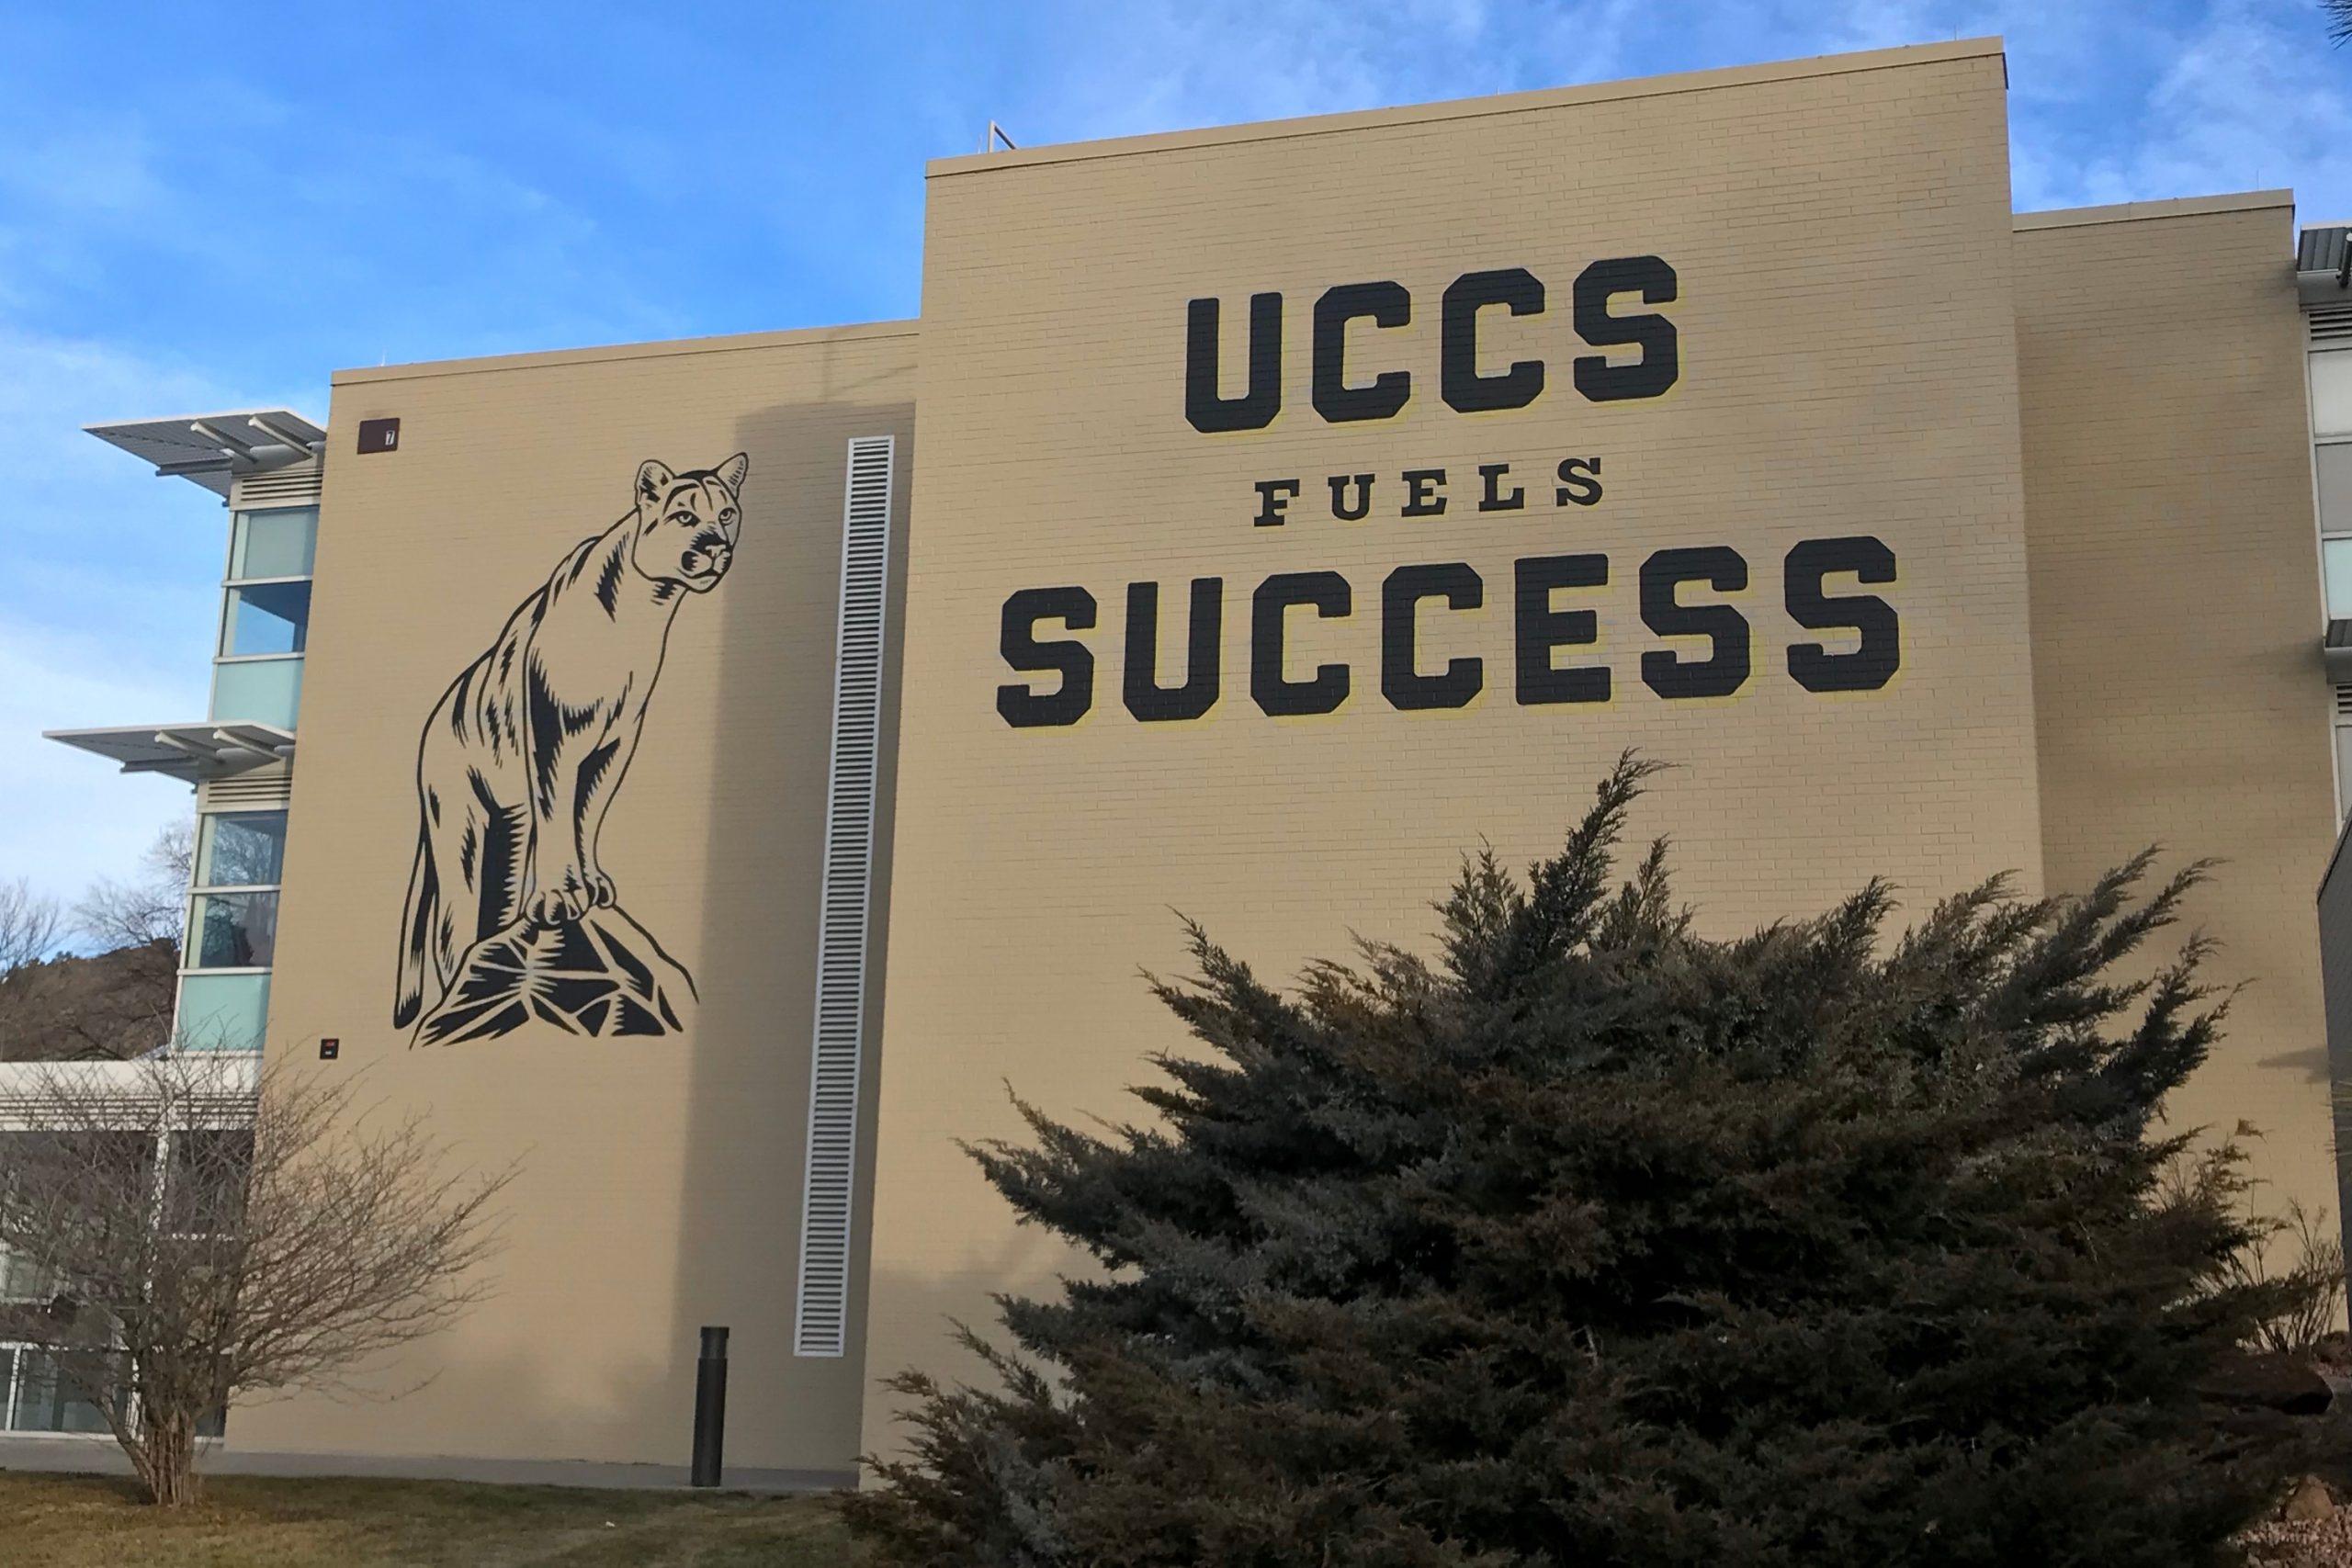 The south side of Cragmor Hall with the UCCS fuels SUCCESS mural